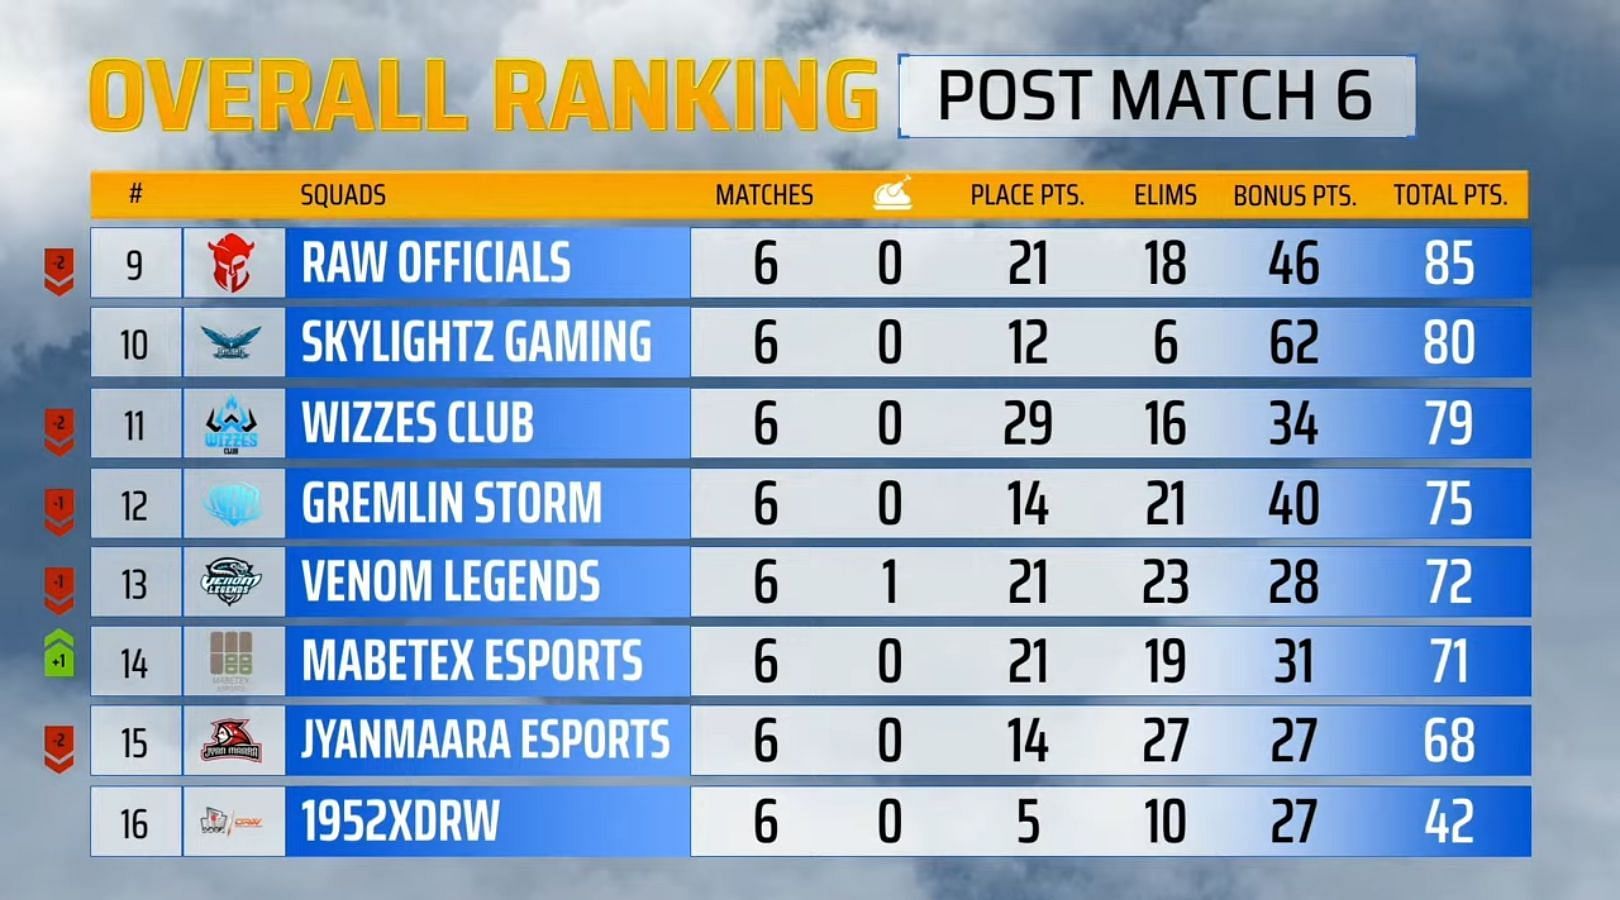 Skylightz Gaming grabbed tenth spot after PMPL SA Finals day 1 (Image via PUBG Mobile)